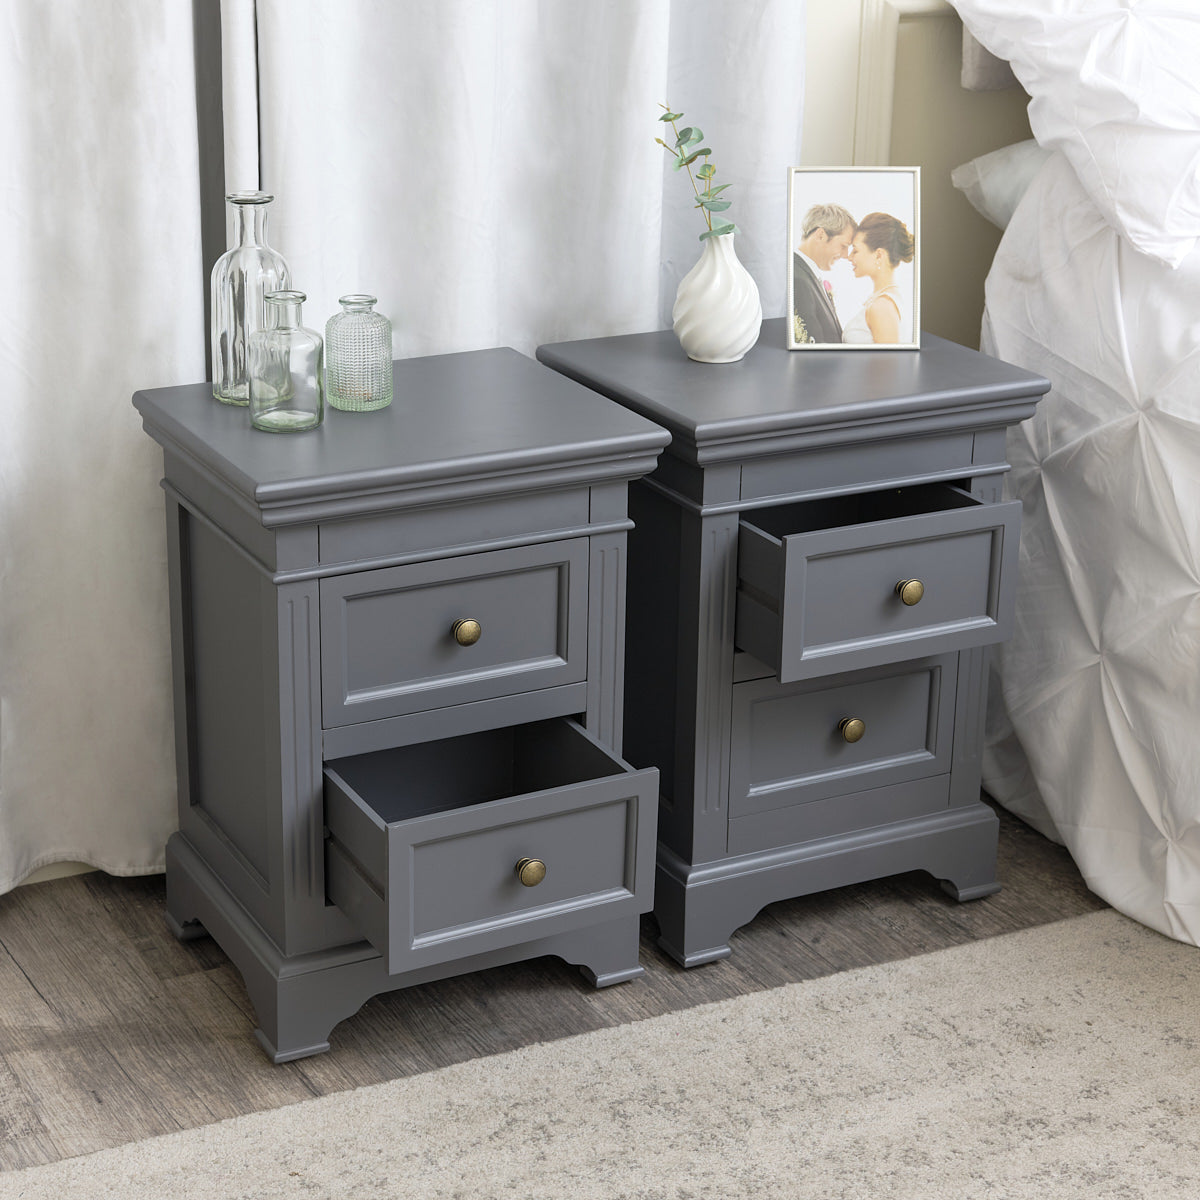 Pair of Midnight Grey Two Drawer Bedside Tables - Daventry Midnight...